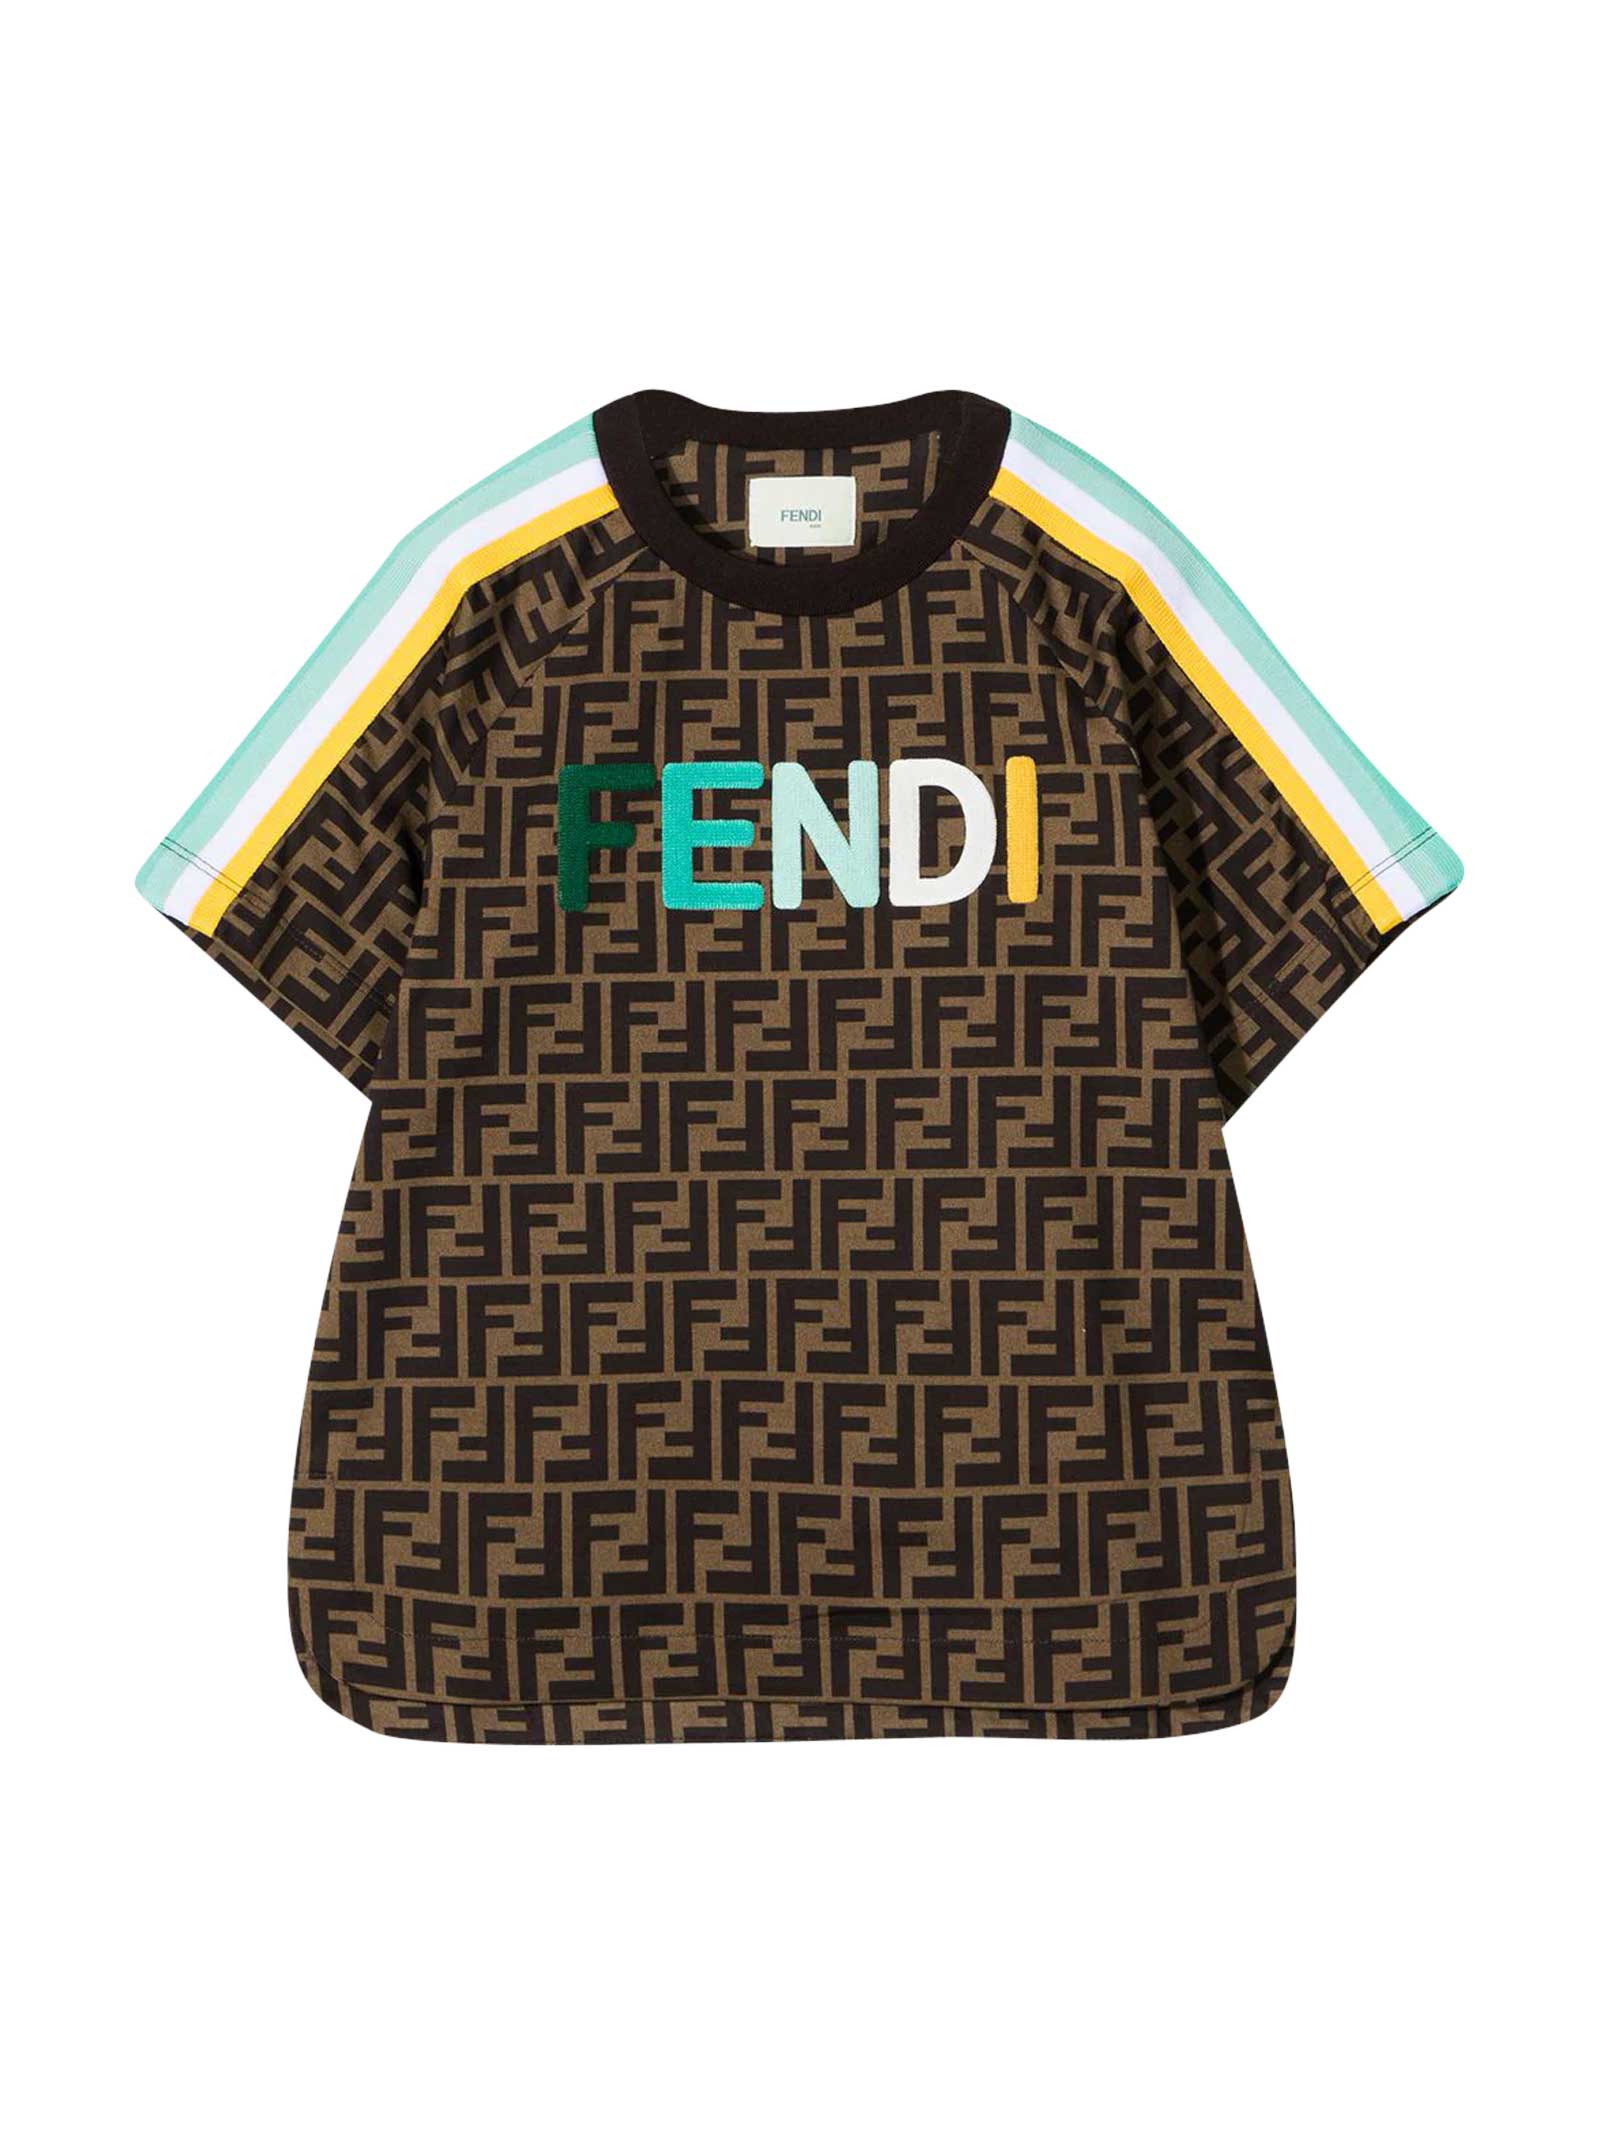 FENDI T-SHIRT WITH LOGOED TEXTURE AND MULTICOLOR APPLICATIONS,JUI015ACZS F1DEP